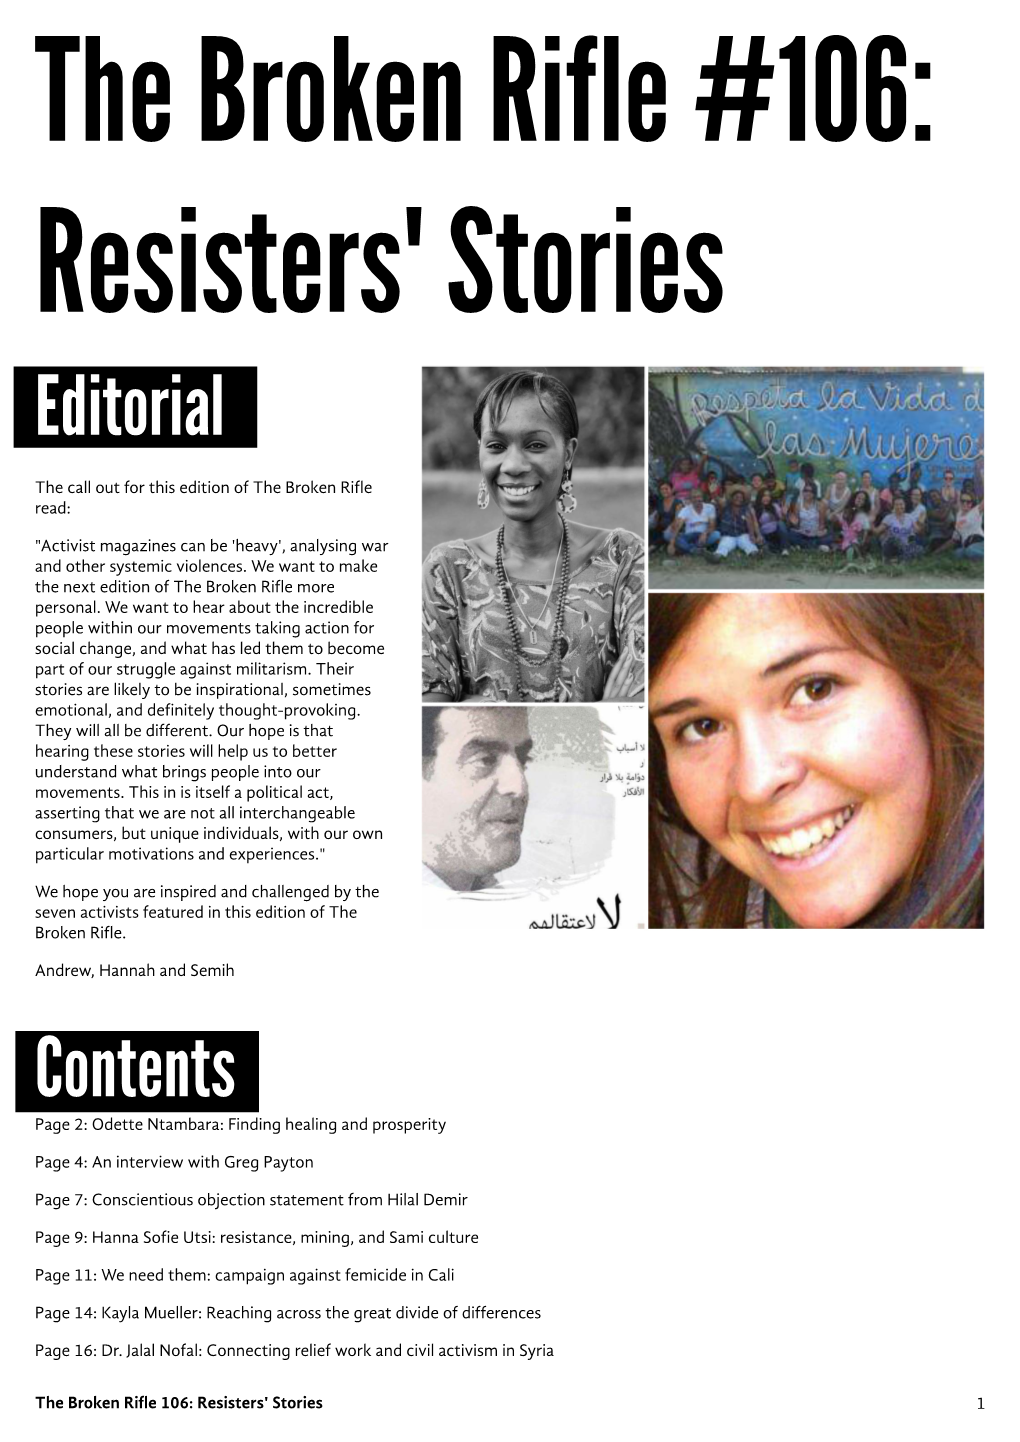 The Broken Rifle #106: Resisters' Stories Editorial